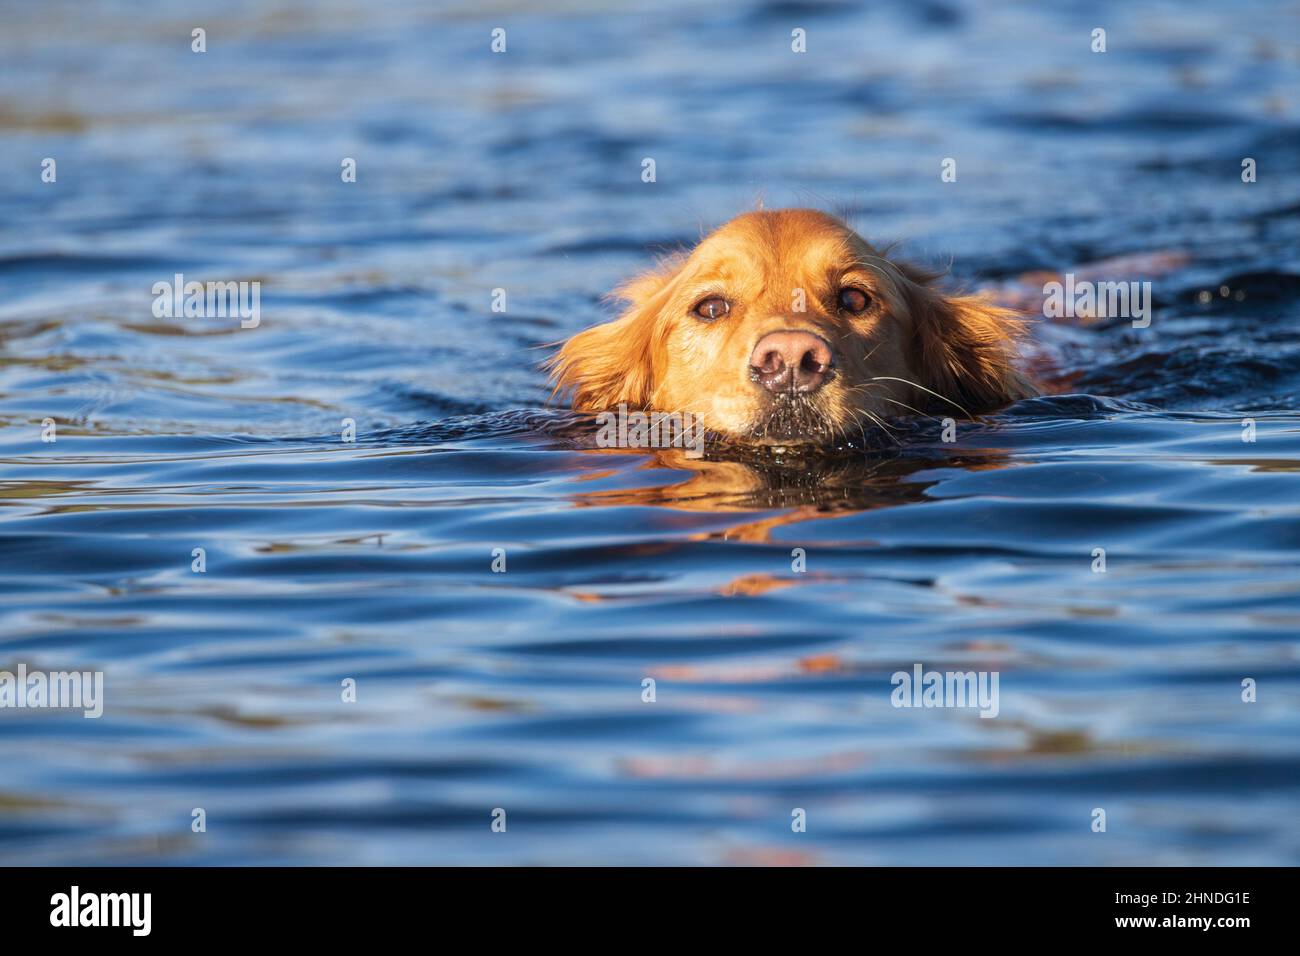 Golden Retriever swimming in a pond. Photographed in Shasta County, California, USA. Stock Photo